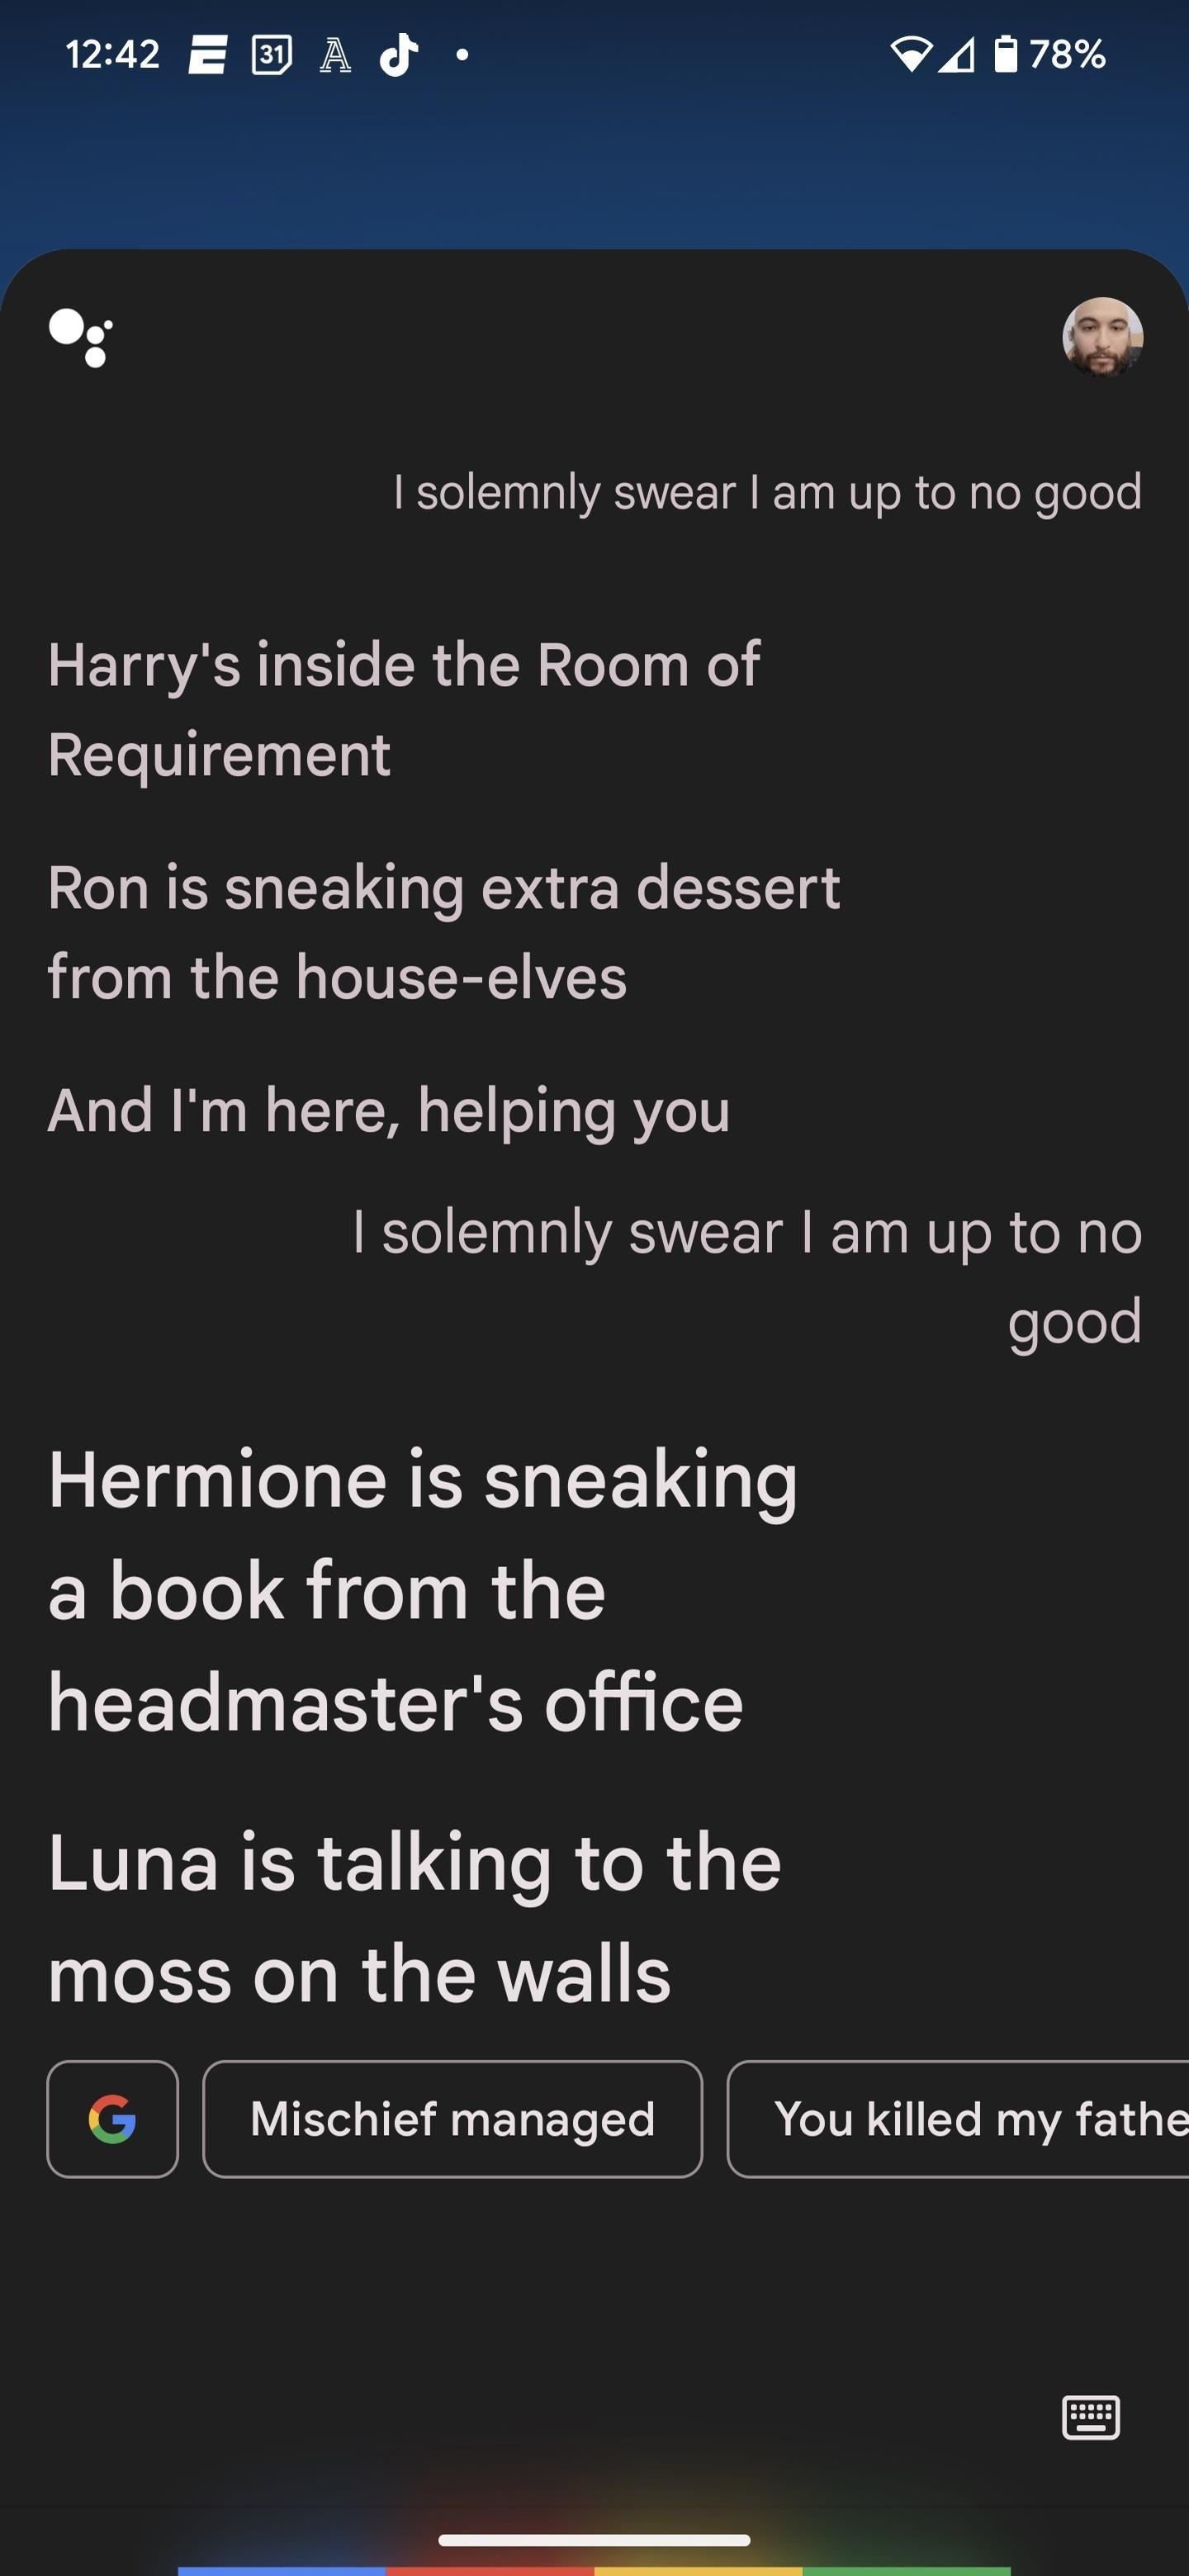 19 Harry Potter Spells Your Android Phone Can Cast Using Google Assistant